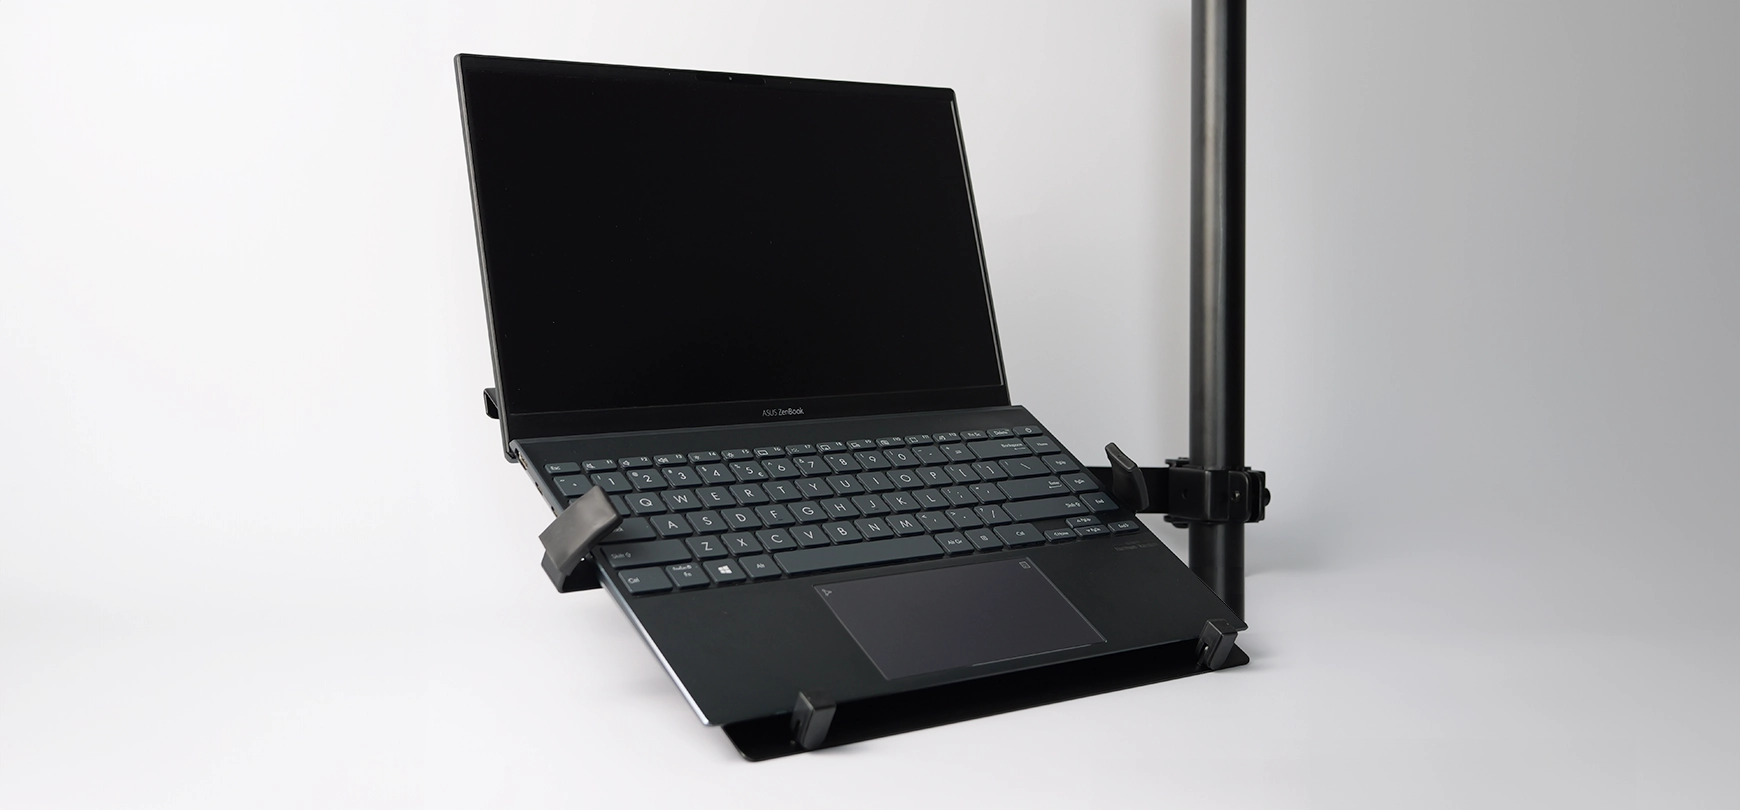 Monitor mount with an additional arm for a laptop